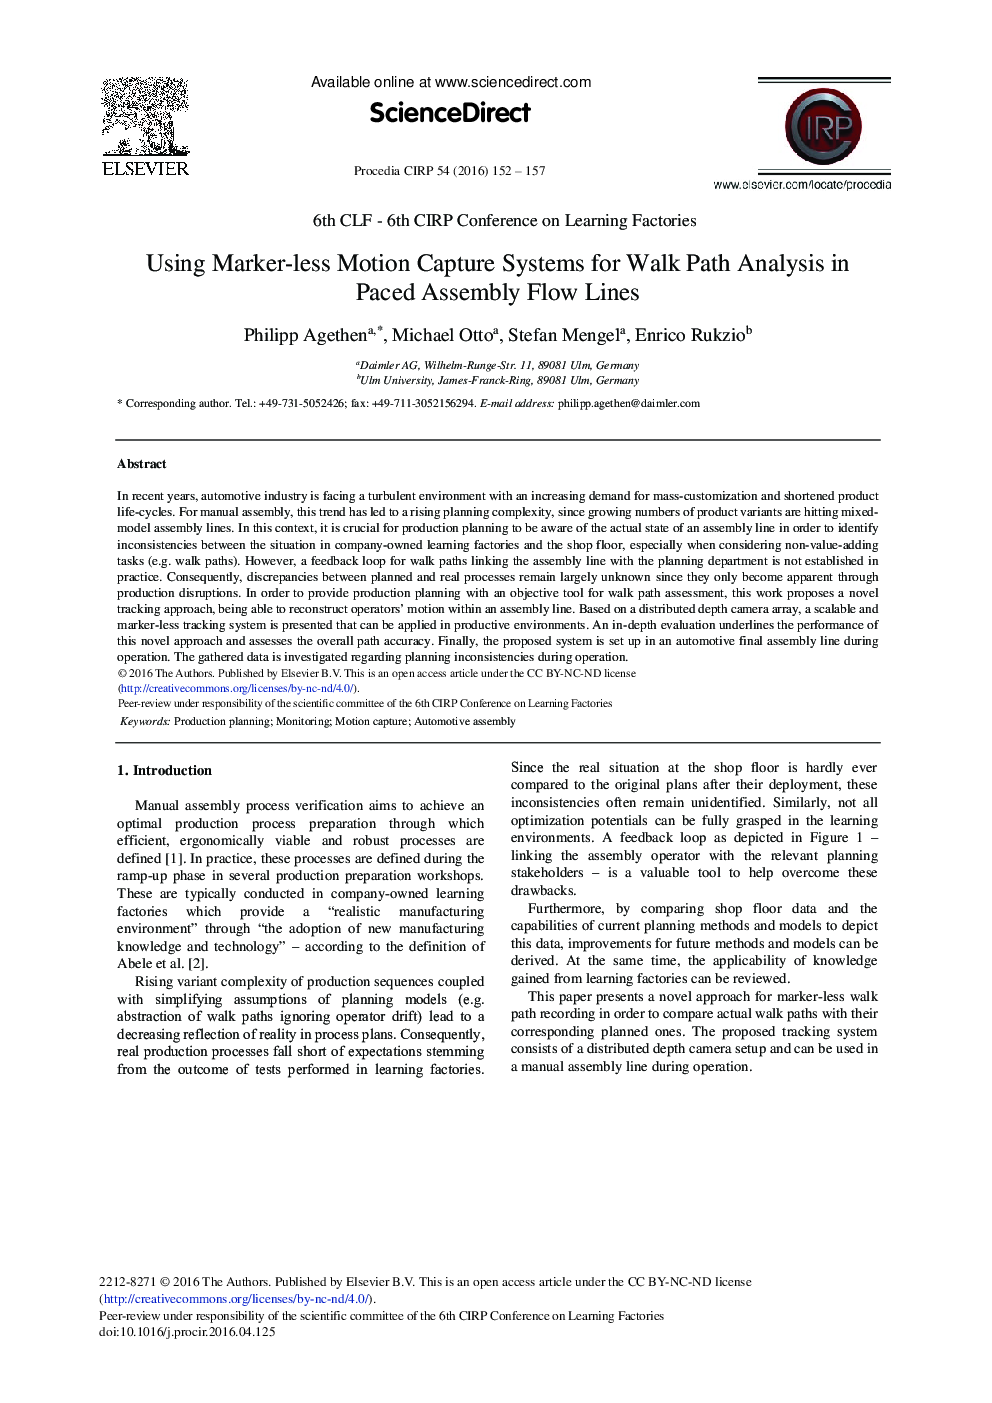 Using Marker-less Motion Capture Systems for Walk Path Analysis in Paced Assembly Flow Lines